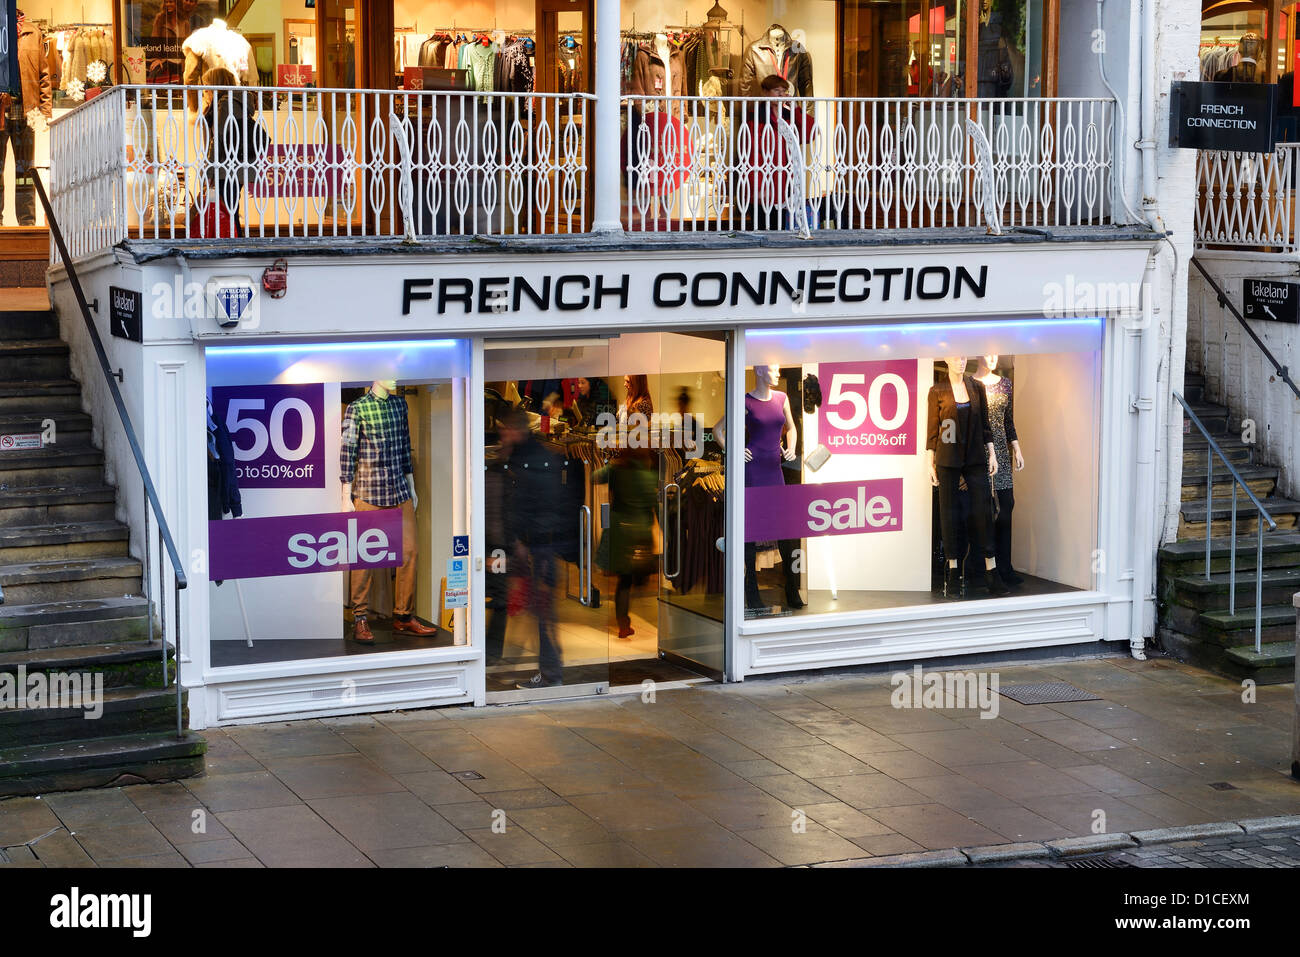 French Connection shop front Stock Photo